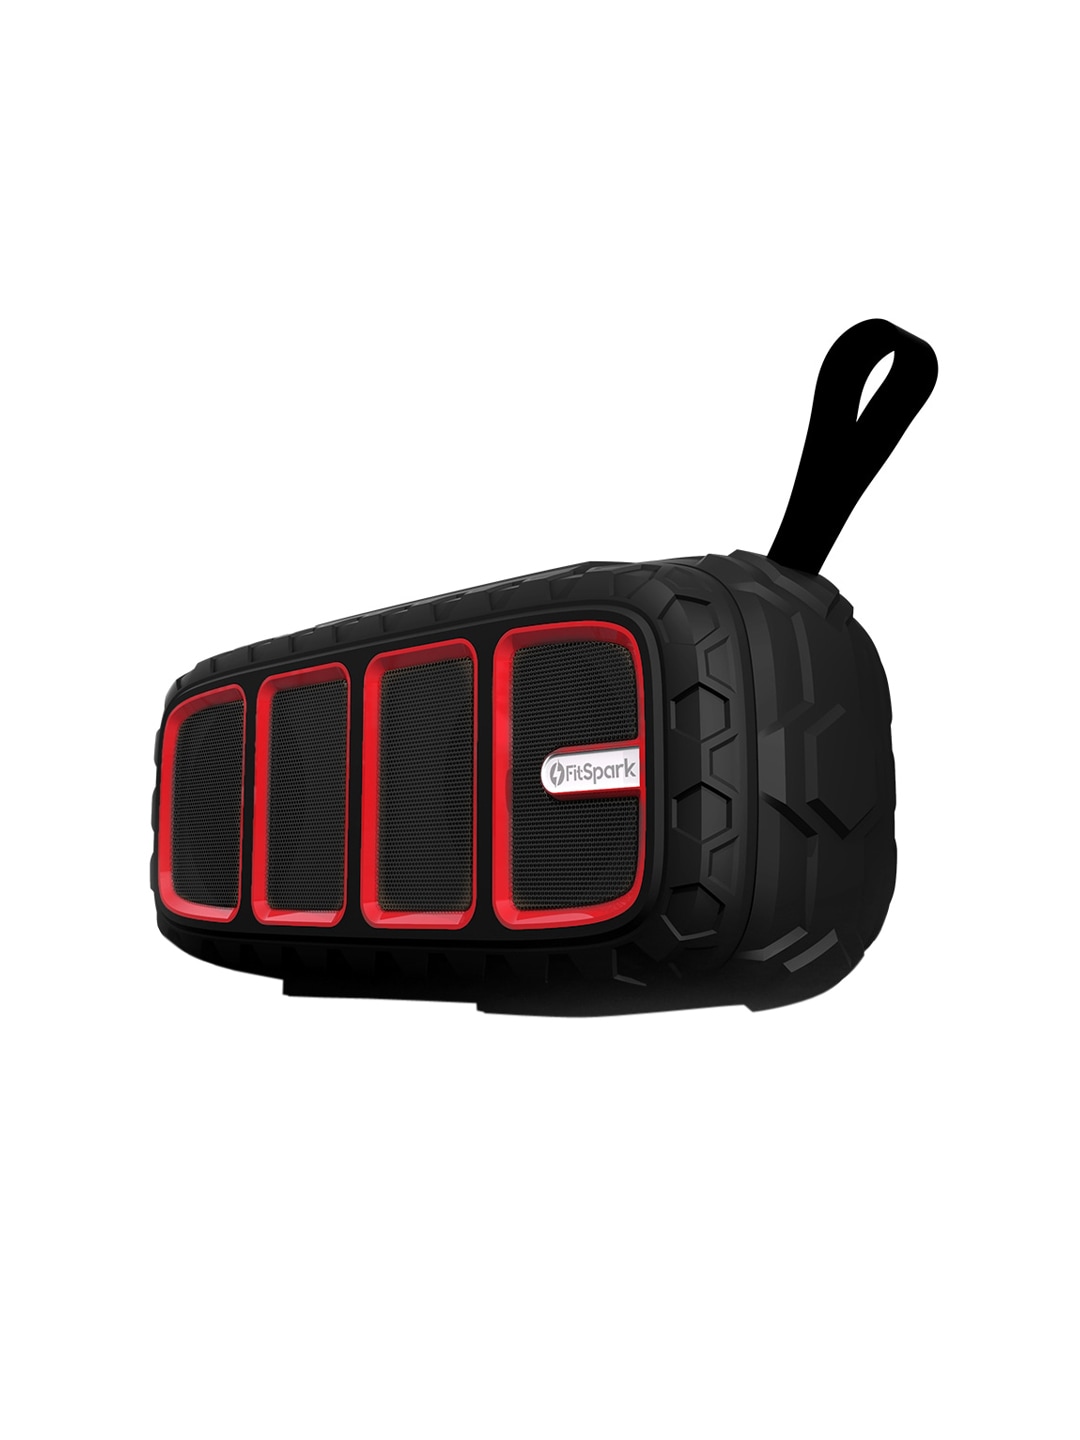 FitSpark Black & Red TAAL Portable Wireless Speaker Price in India